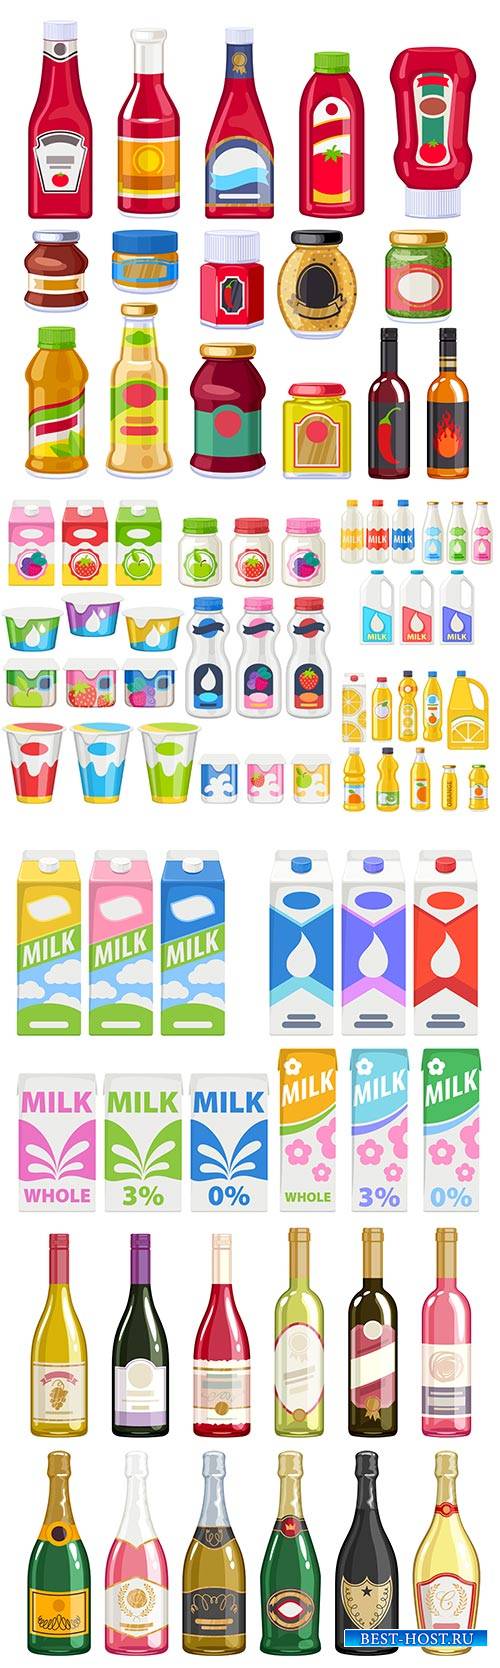 Bottles vector set products packaging